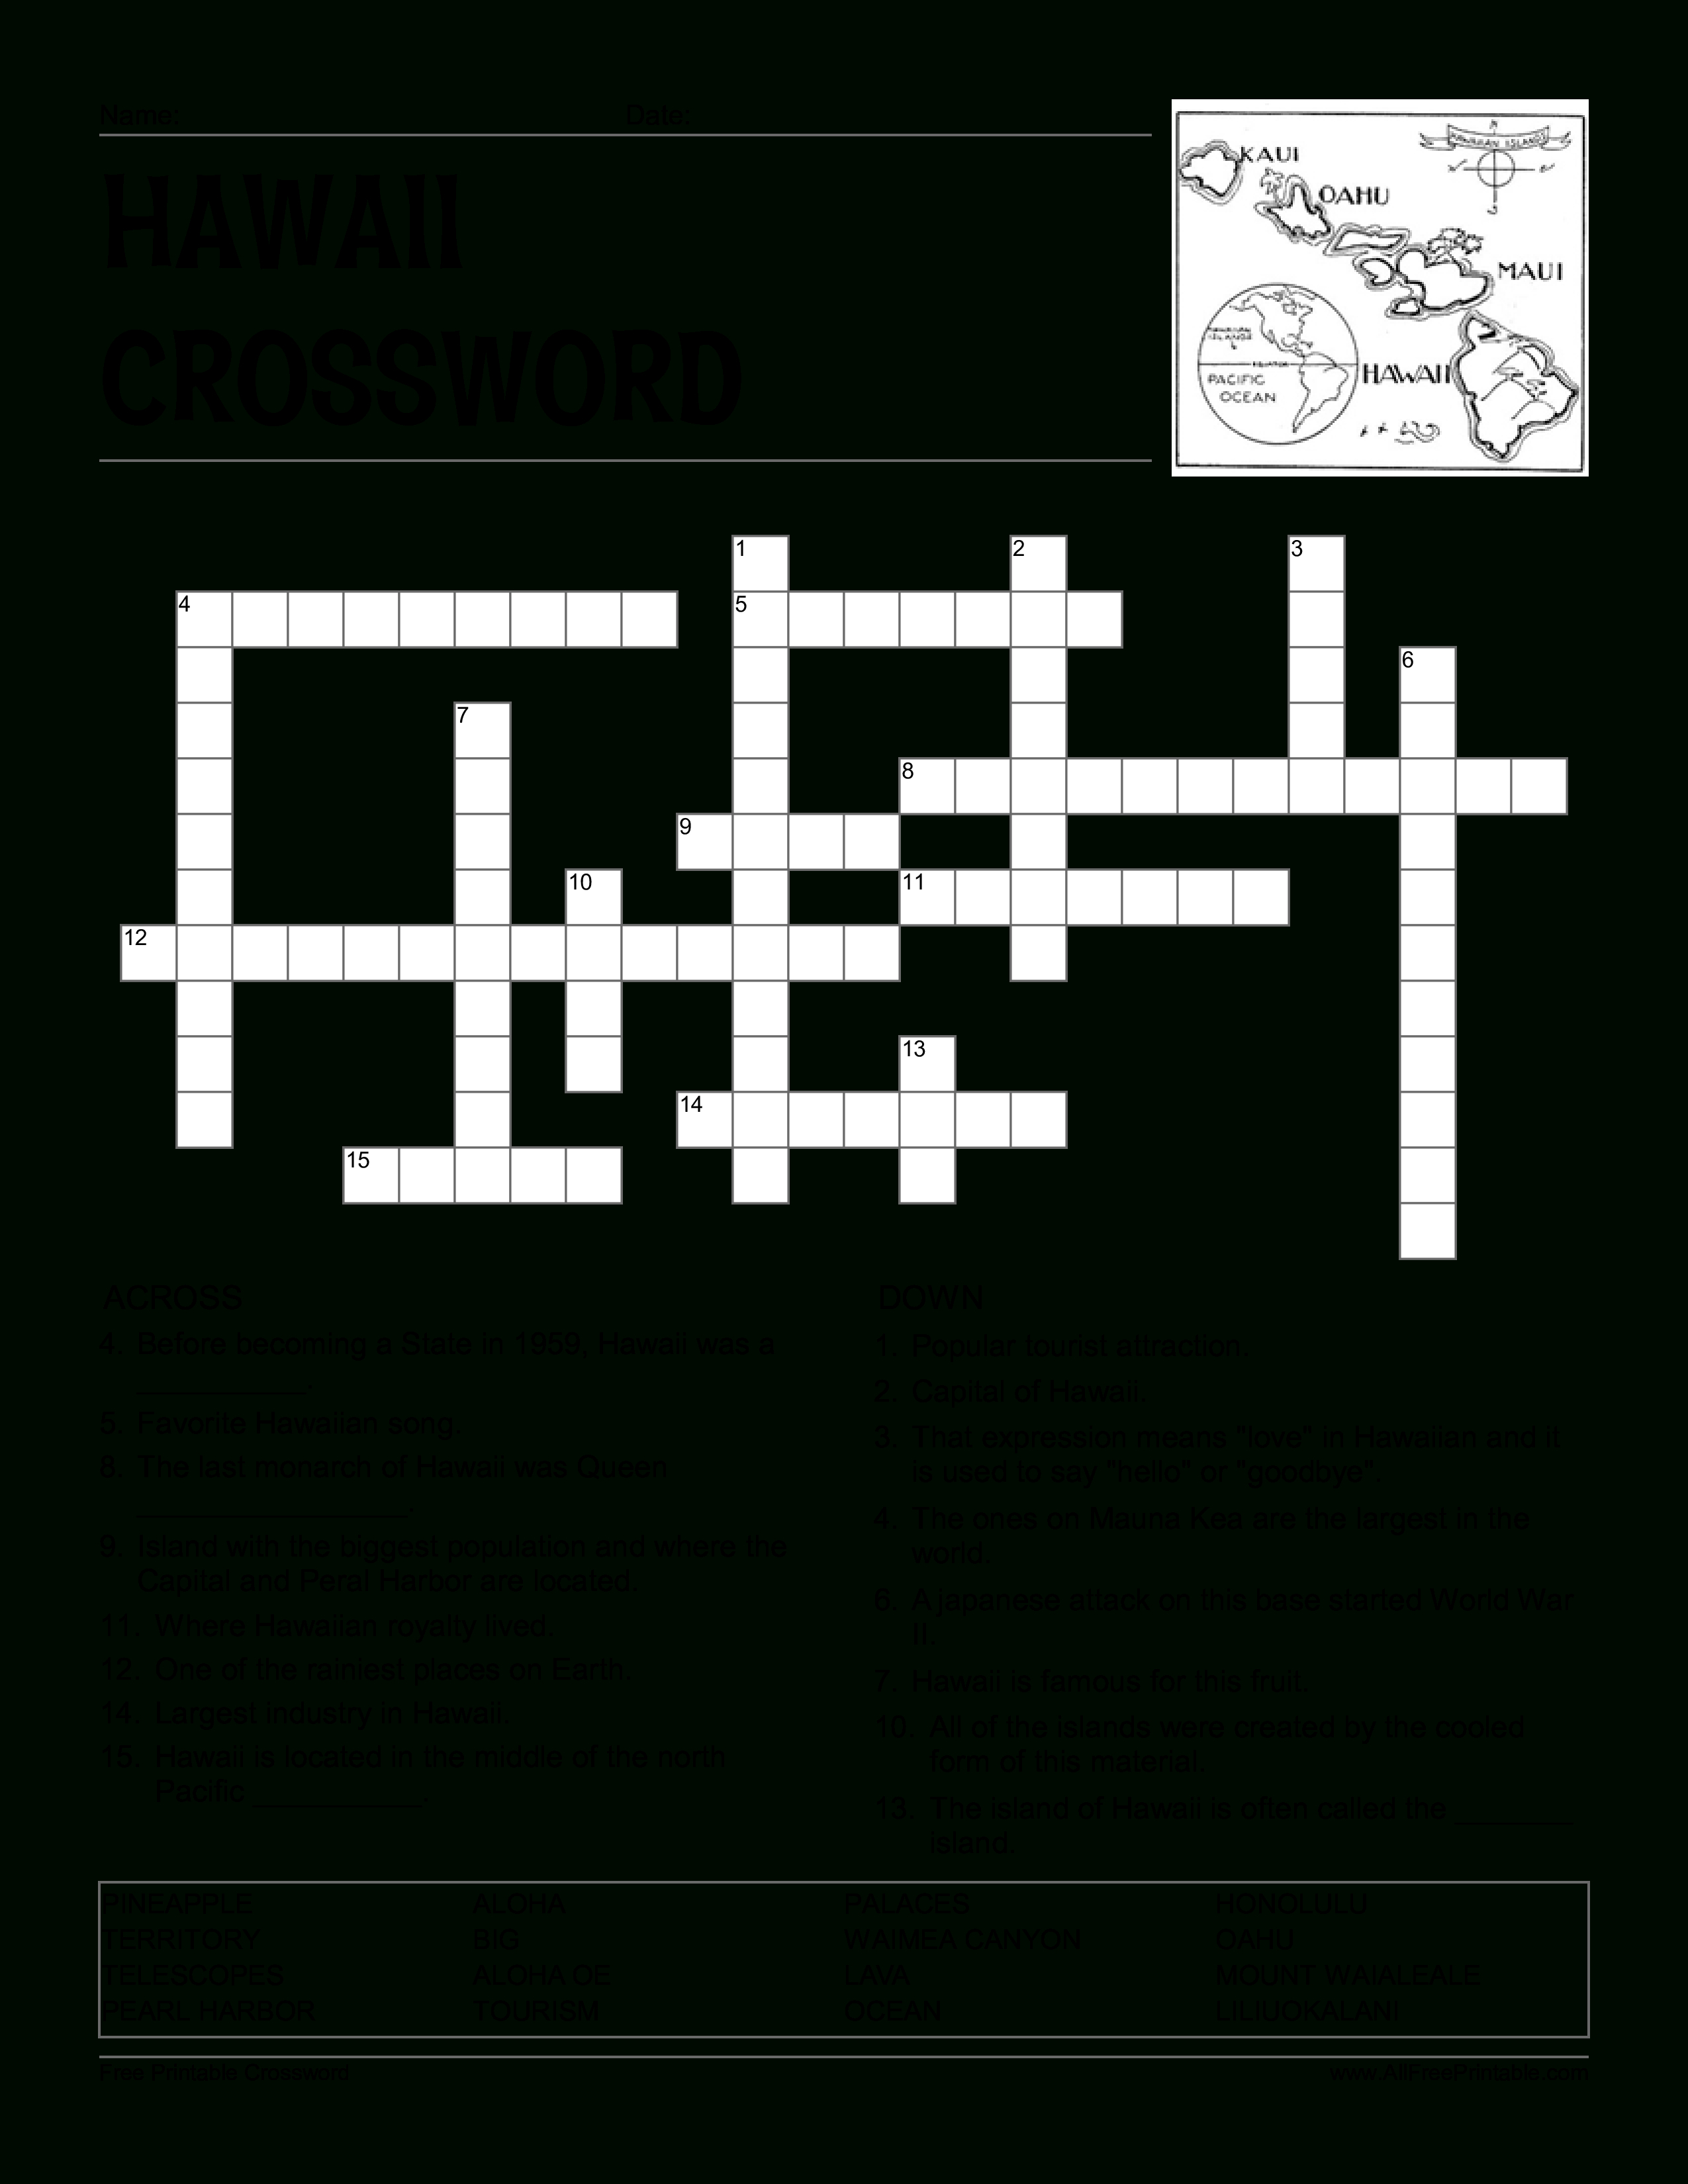 Hawaii Crossword Puzzle | Templates At Allbusinesstemplates - Printable Crossword Puzzle Template